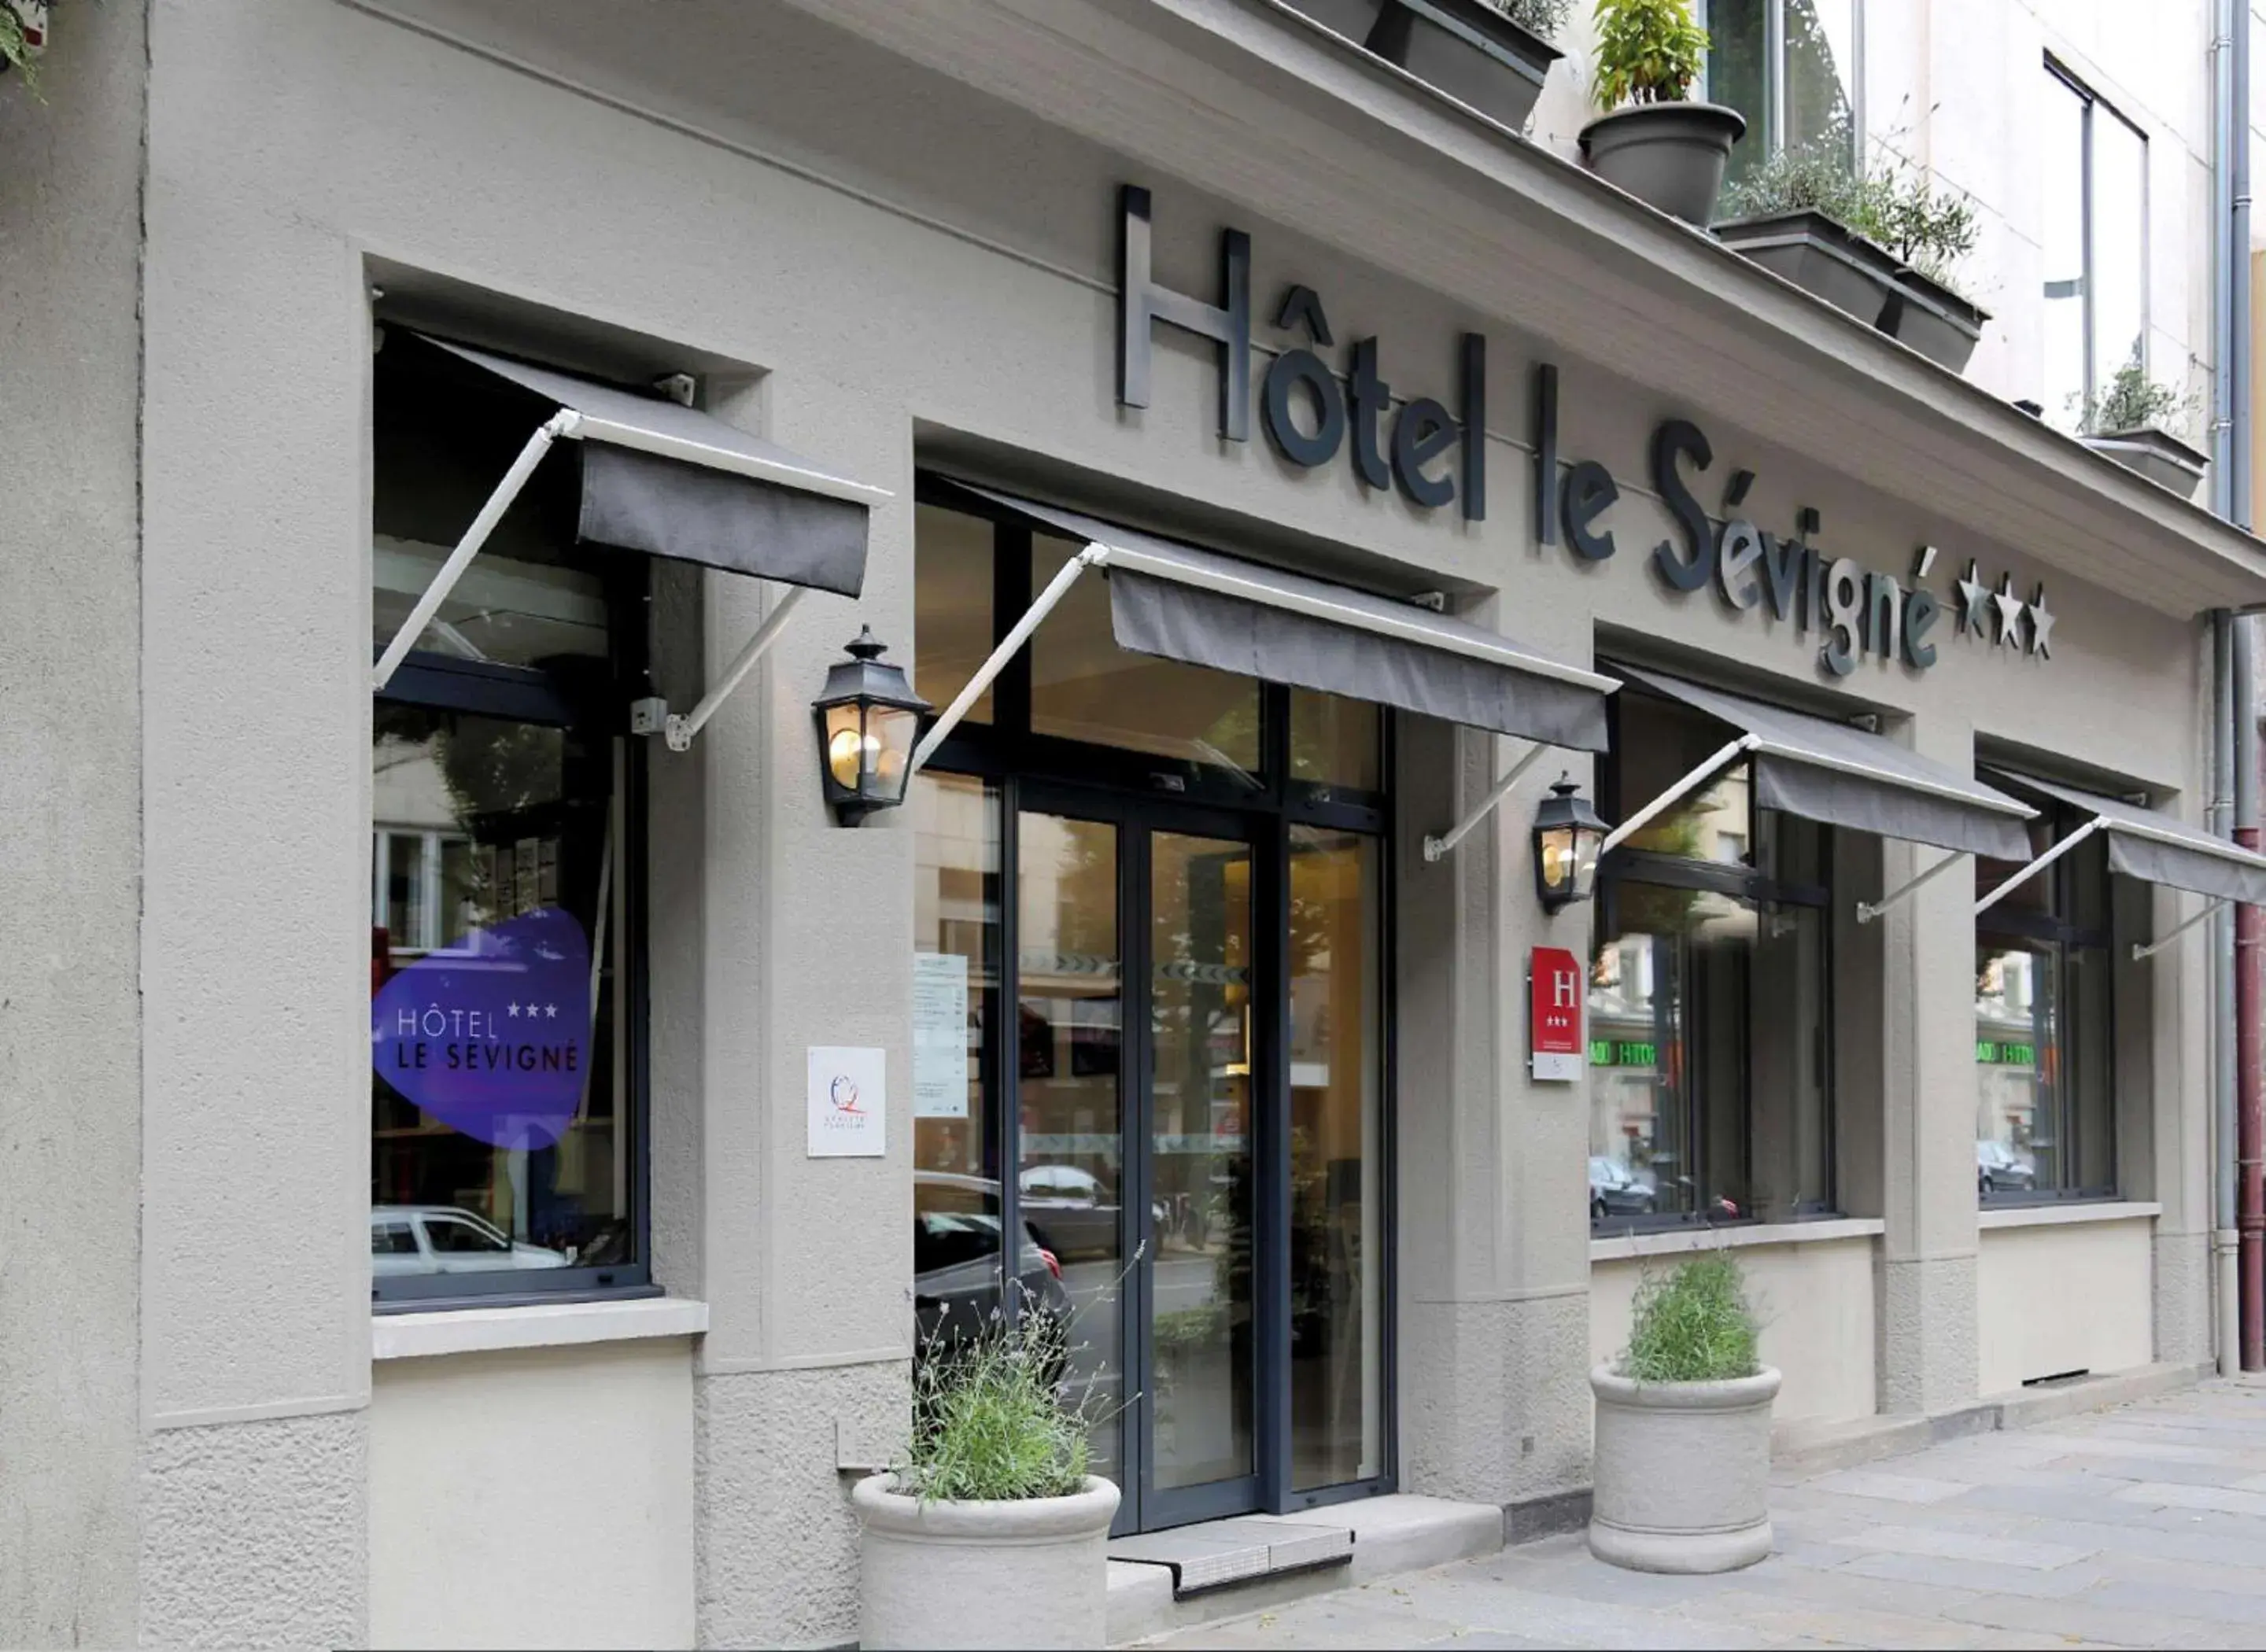 Property building in Hotel Le Sevigne - Sure Hotel Collection by Best Western